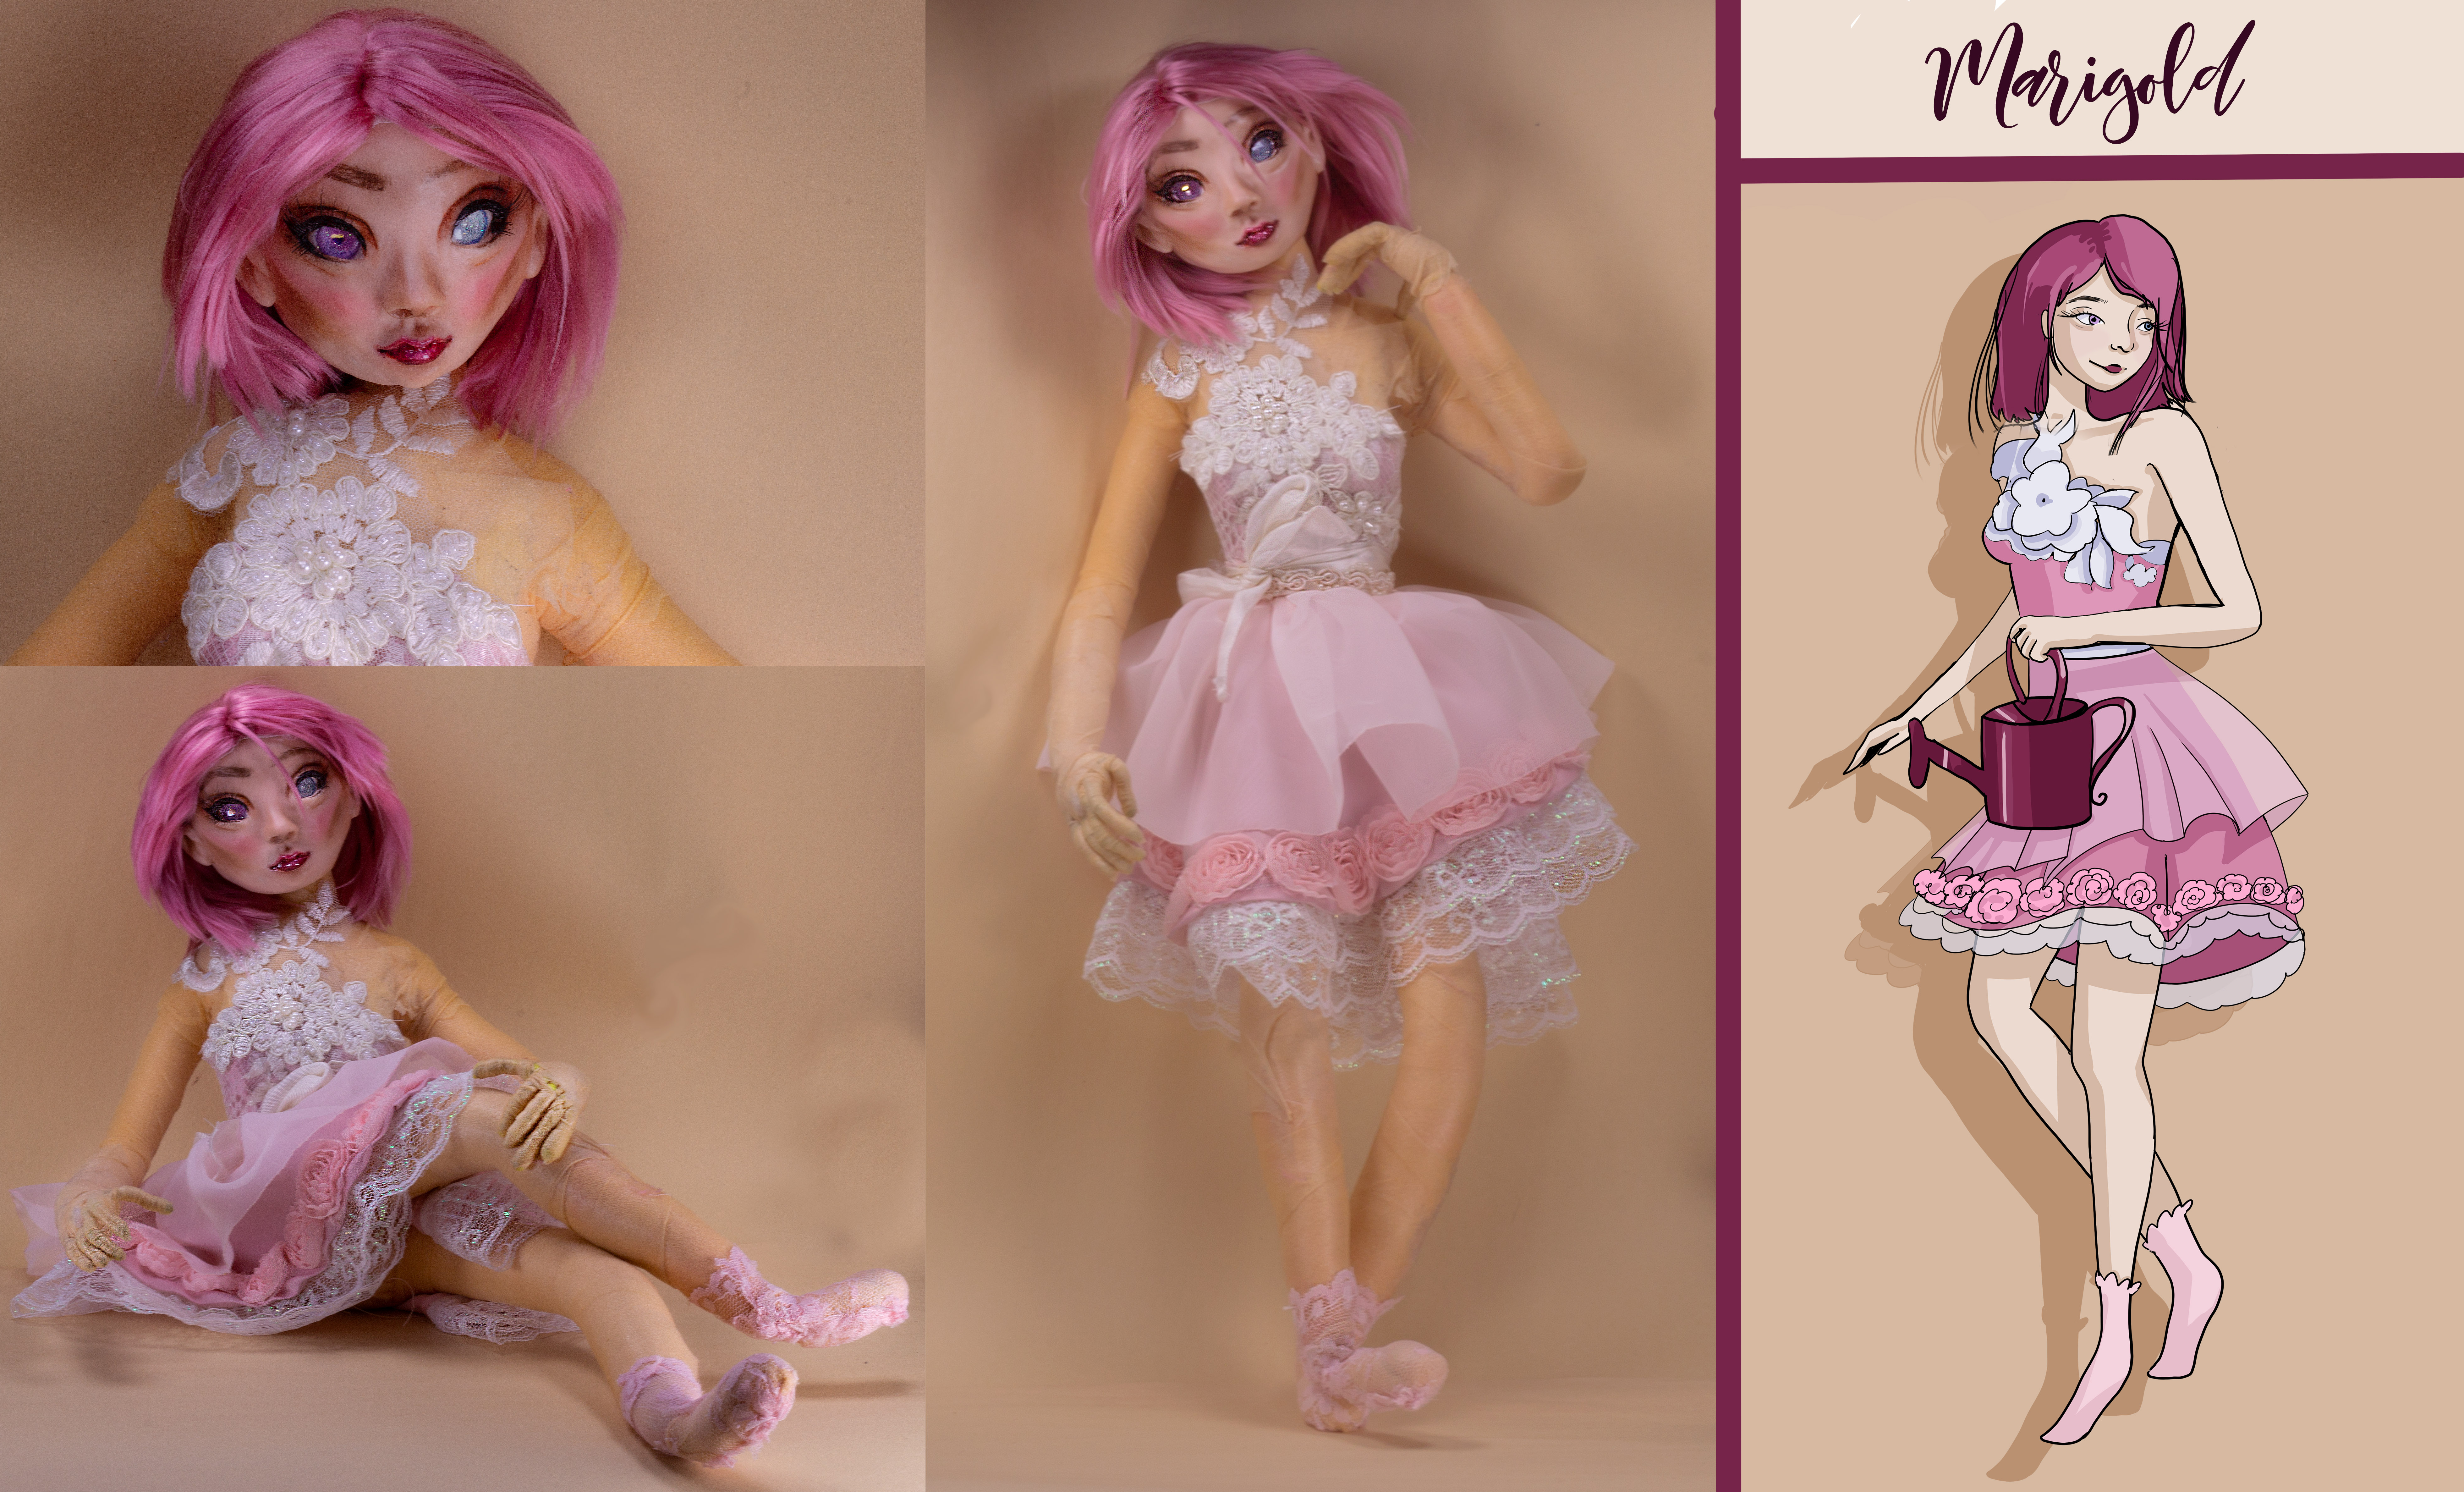 Three photos of a doll wearing a pink and white dress, and a 2D character illustration. Marigold is written in a script font